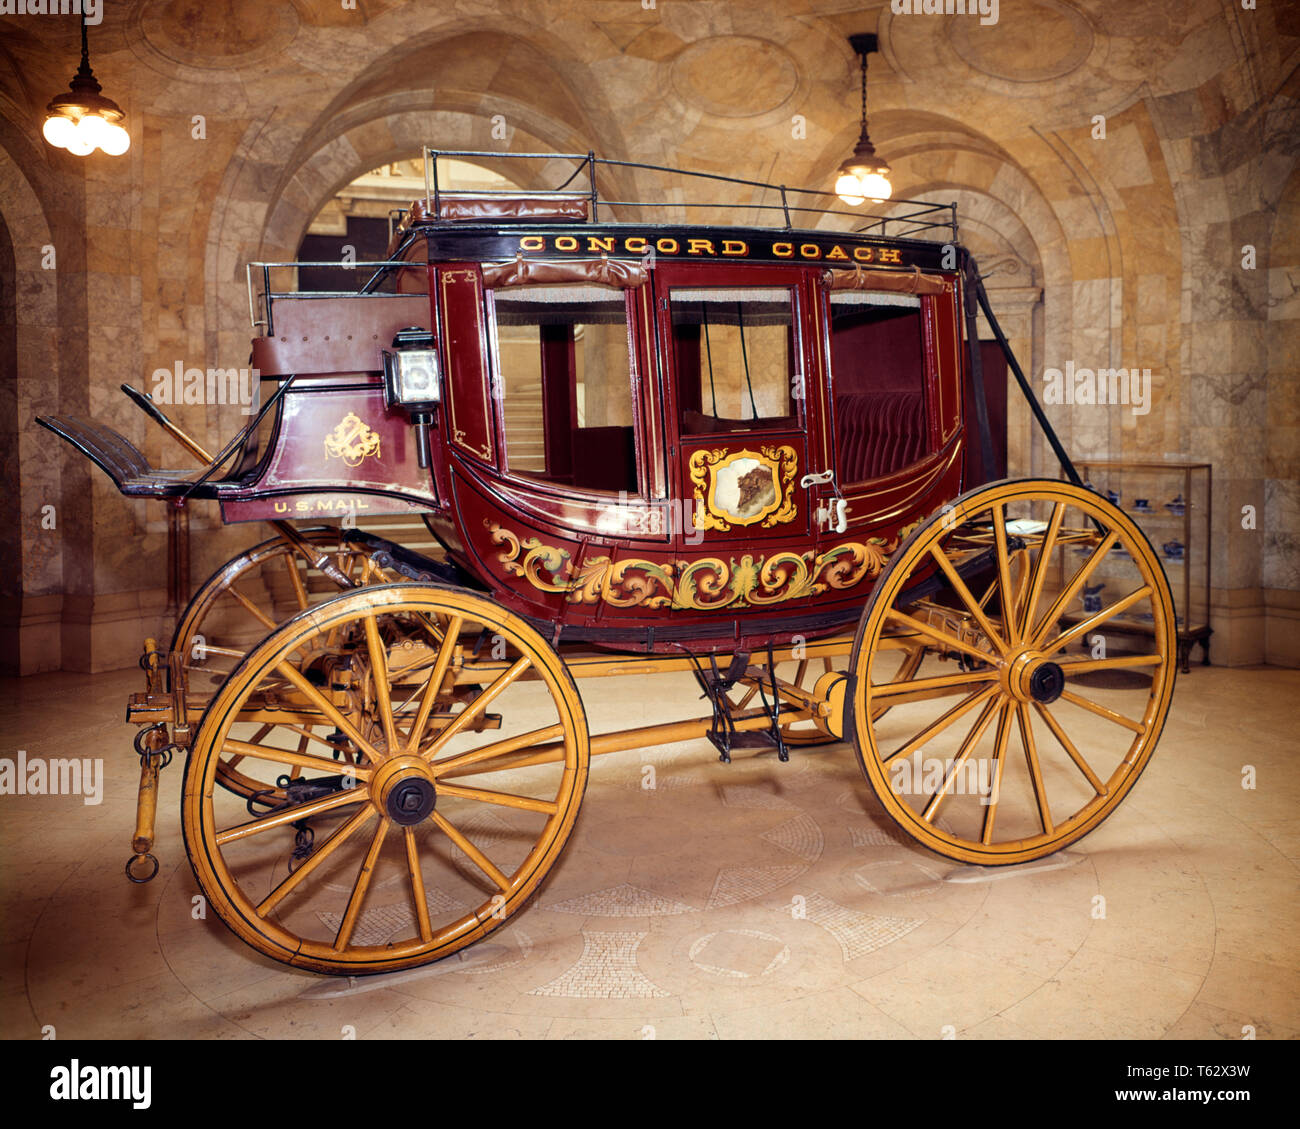 1980s NEW HAMPSHIRE HISTORICAL SOCIETY RED & YELLOW CONCORD COACH  STAGECOACH WAGON USED FOR MAIL DELIVERY - kh2265 HAR001 HARS 19TH CENTURY  CONCEPTUAL STILL LIFE STAGECOACH STYLISH STAGECOACHES CONCORD CONSTANT  ROADS SUITED